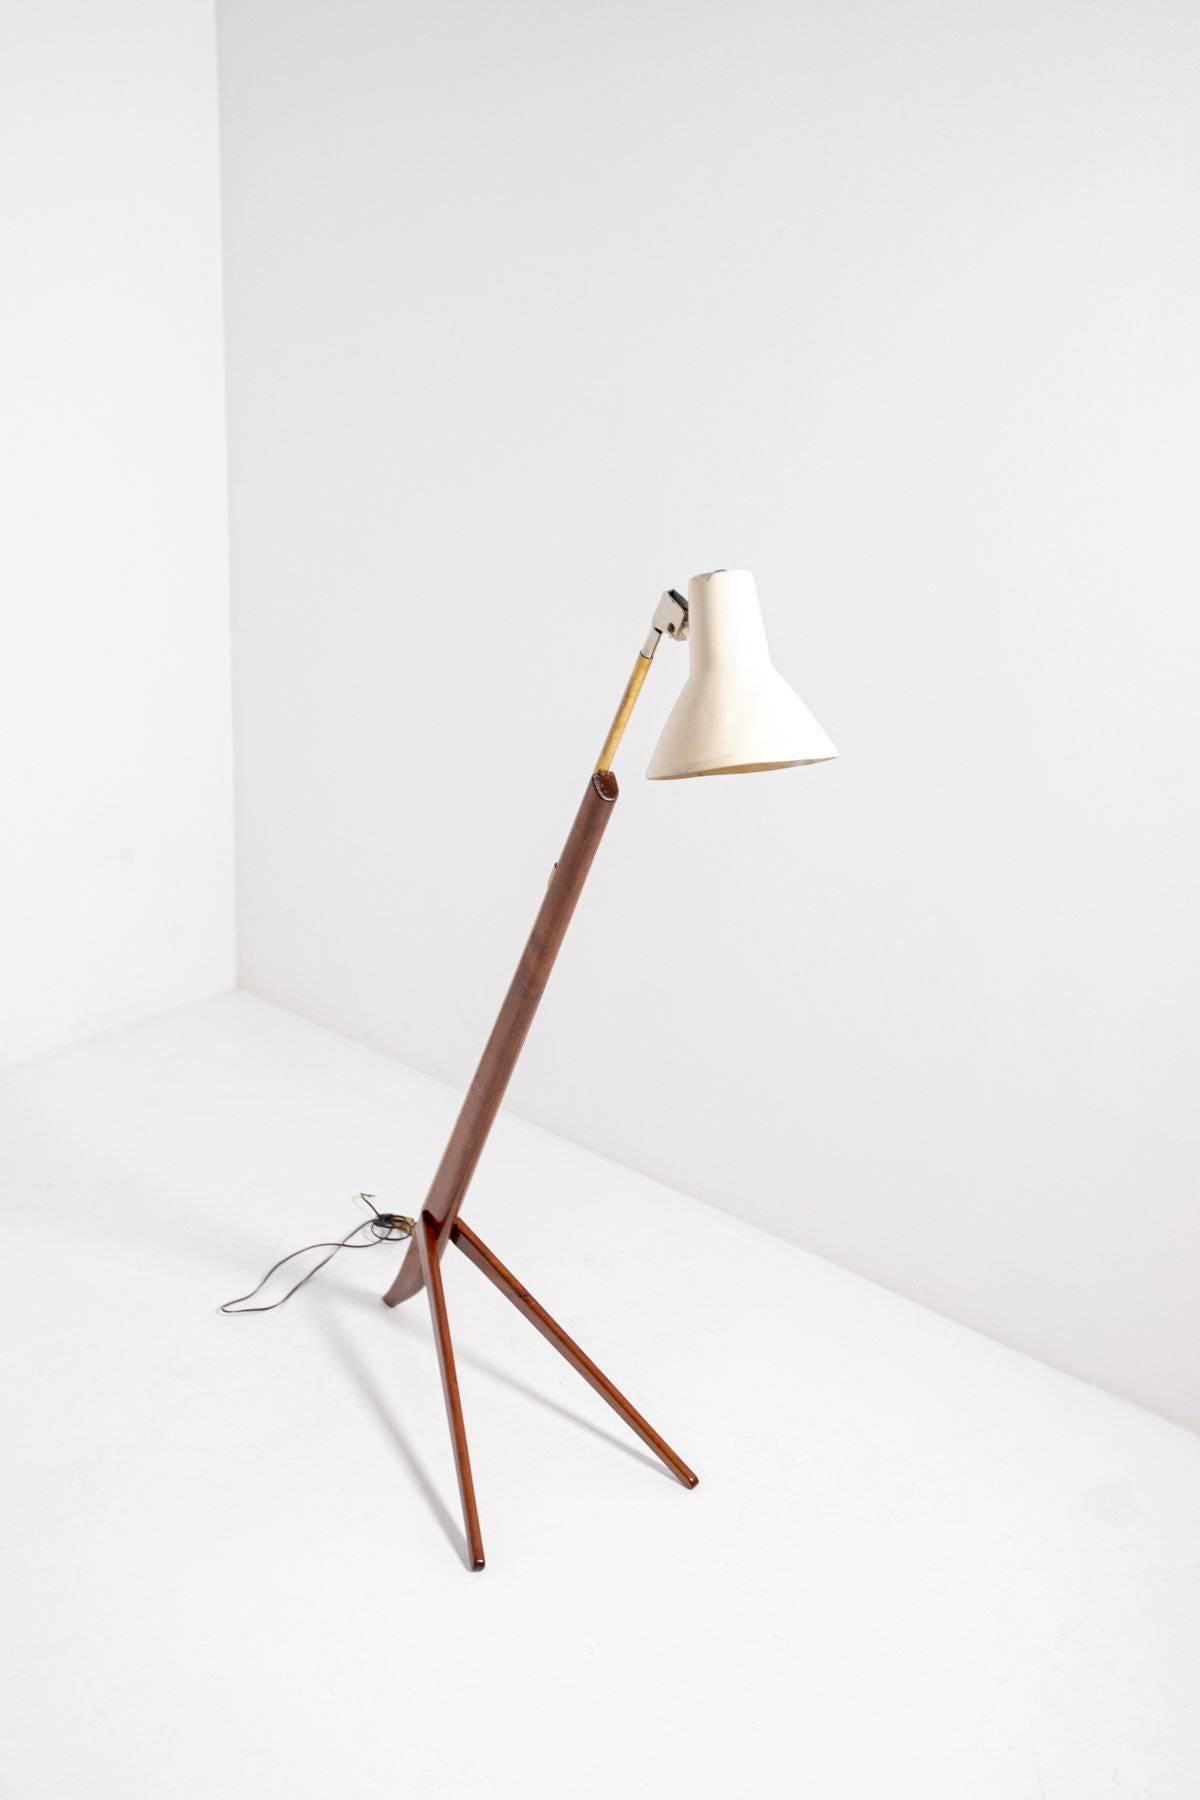 Mid-20th Century Vintage Floor Lamp Attributed to Franco Albini, 1950s For Sale